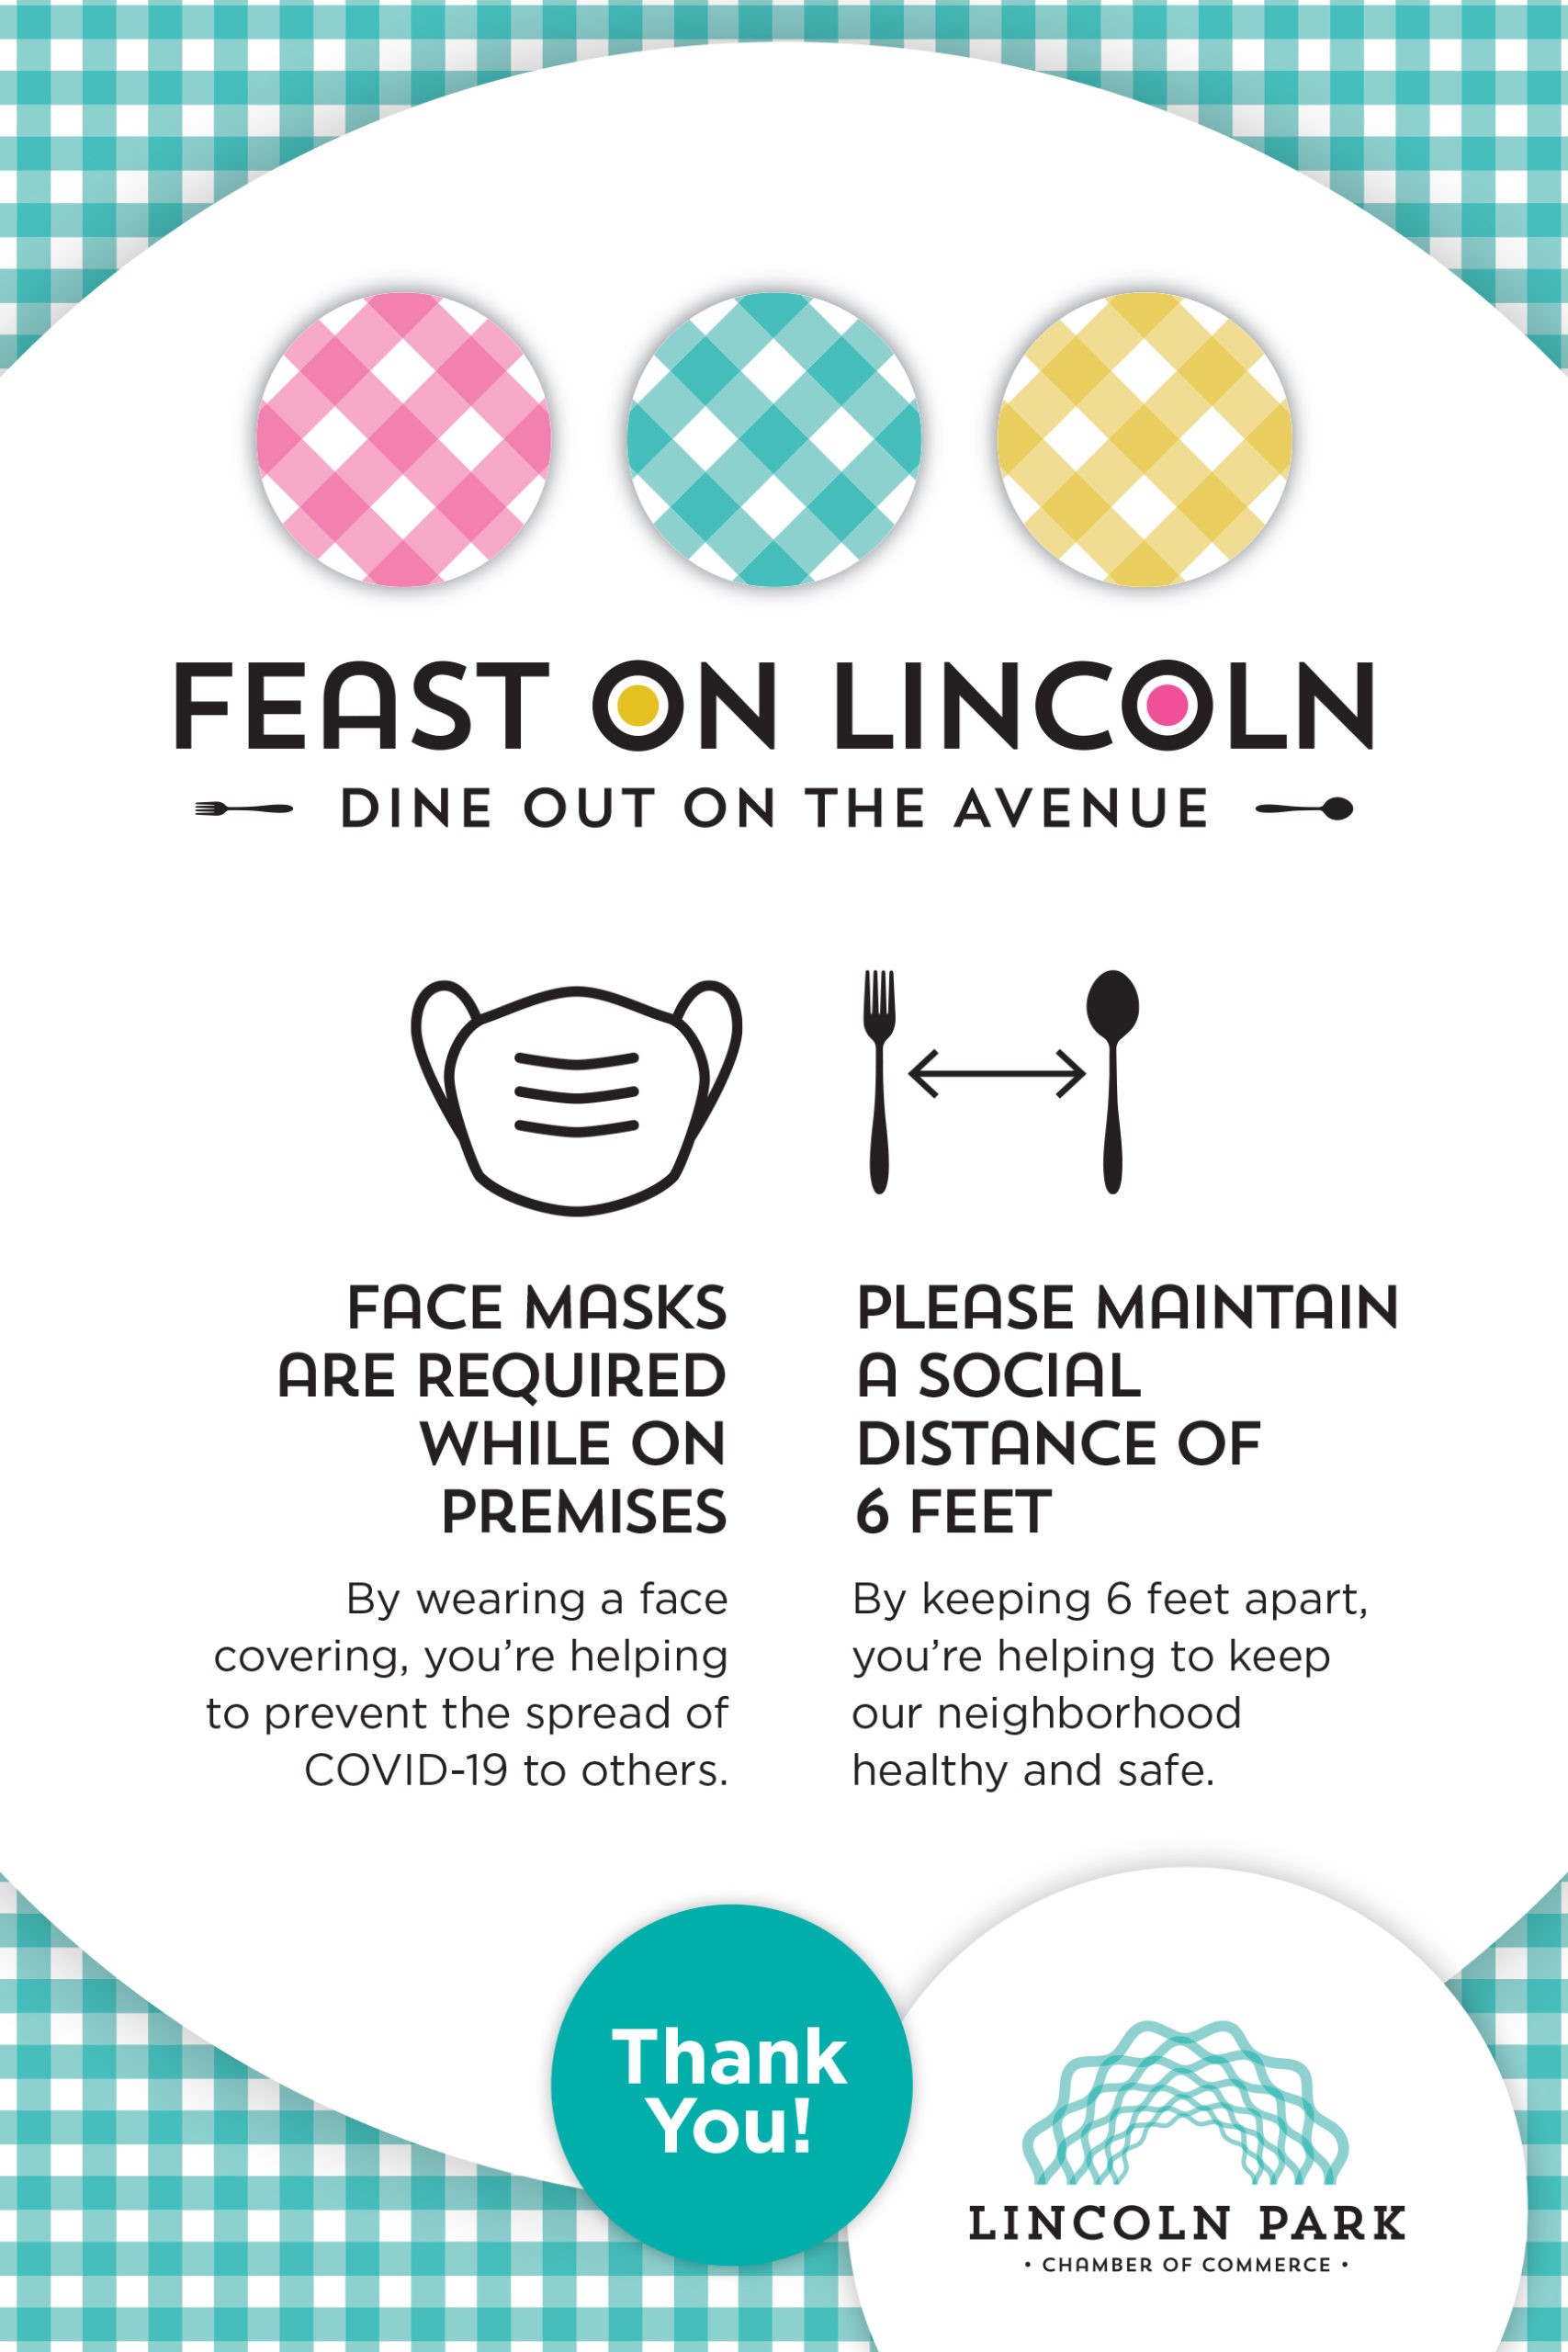 Feast On Lincoln Masks and Distance Reminder